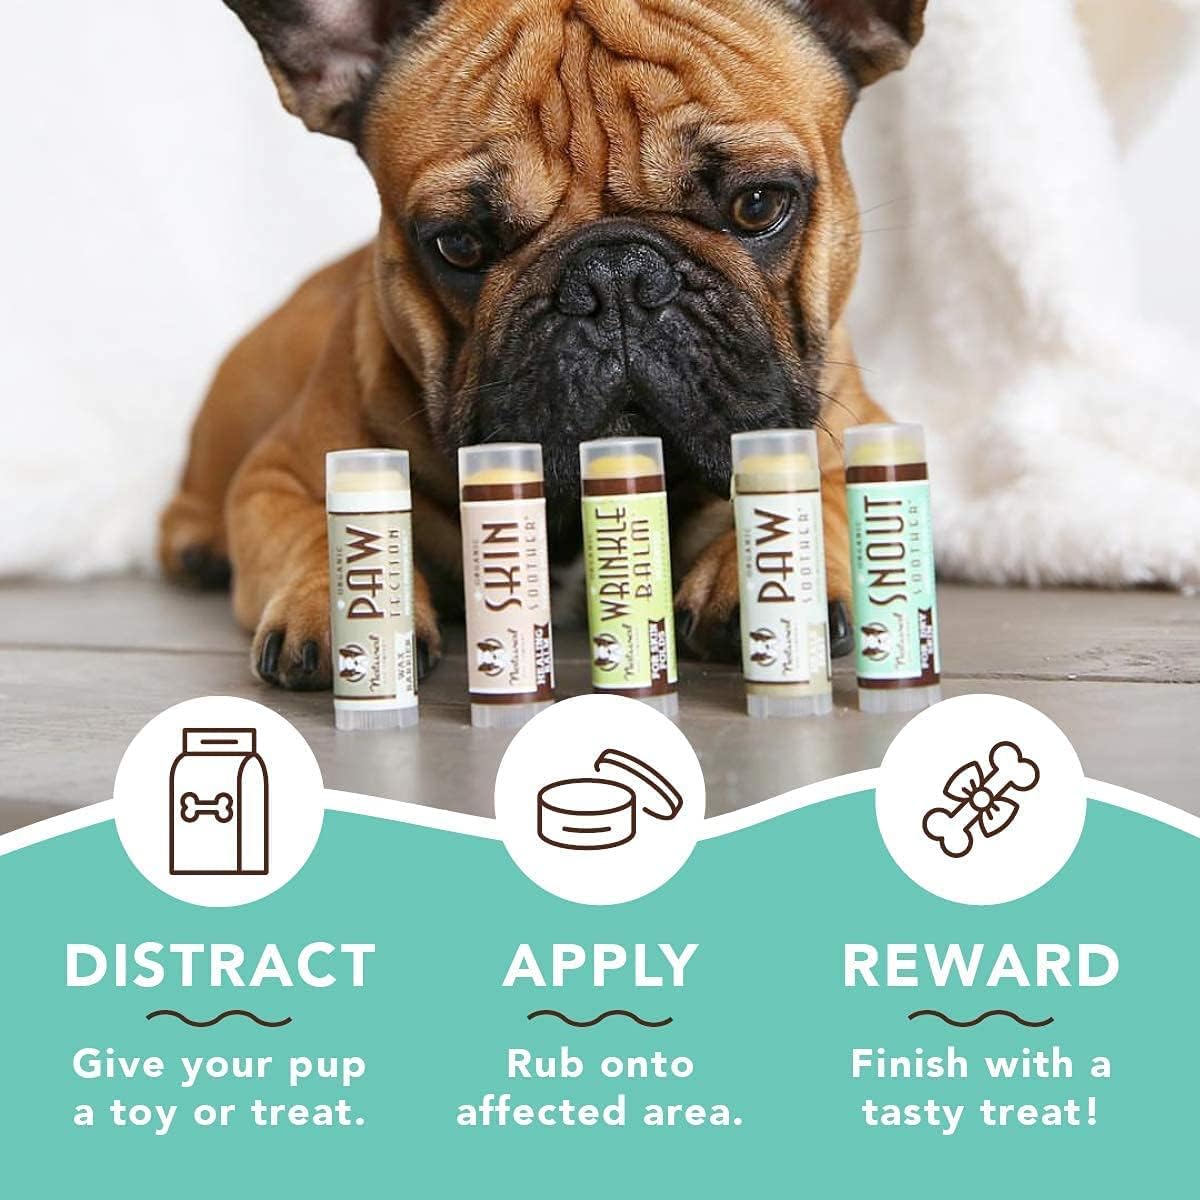 Natural Dog Company Powerhouse Bundle, Includes 5 Healing Balms that Relieve Skin Irritations, Cracked Paws and Dry Noses, Organic, All Natural Ingredients, 0.15oz Trial Sticks : Pet Supplies